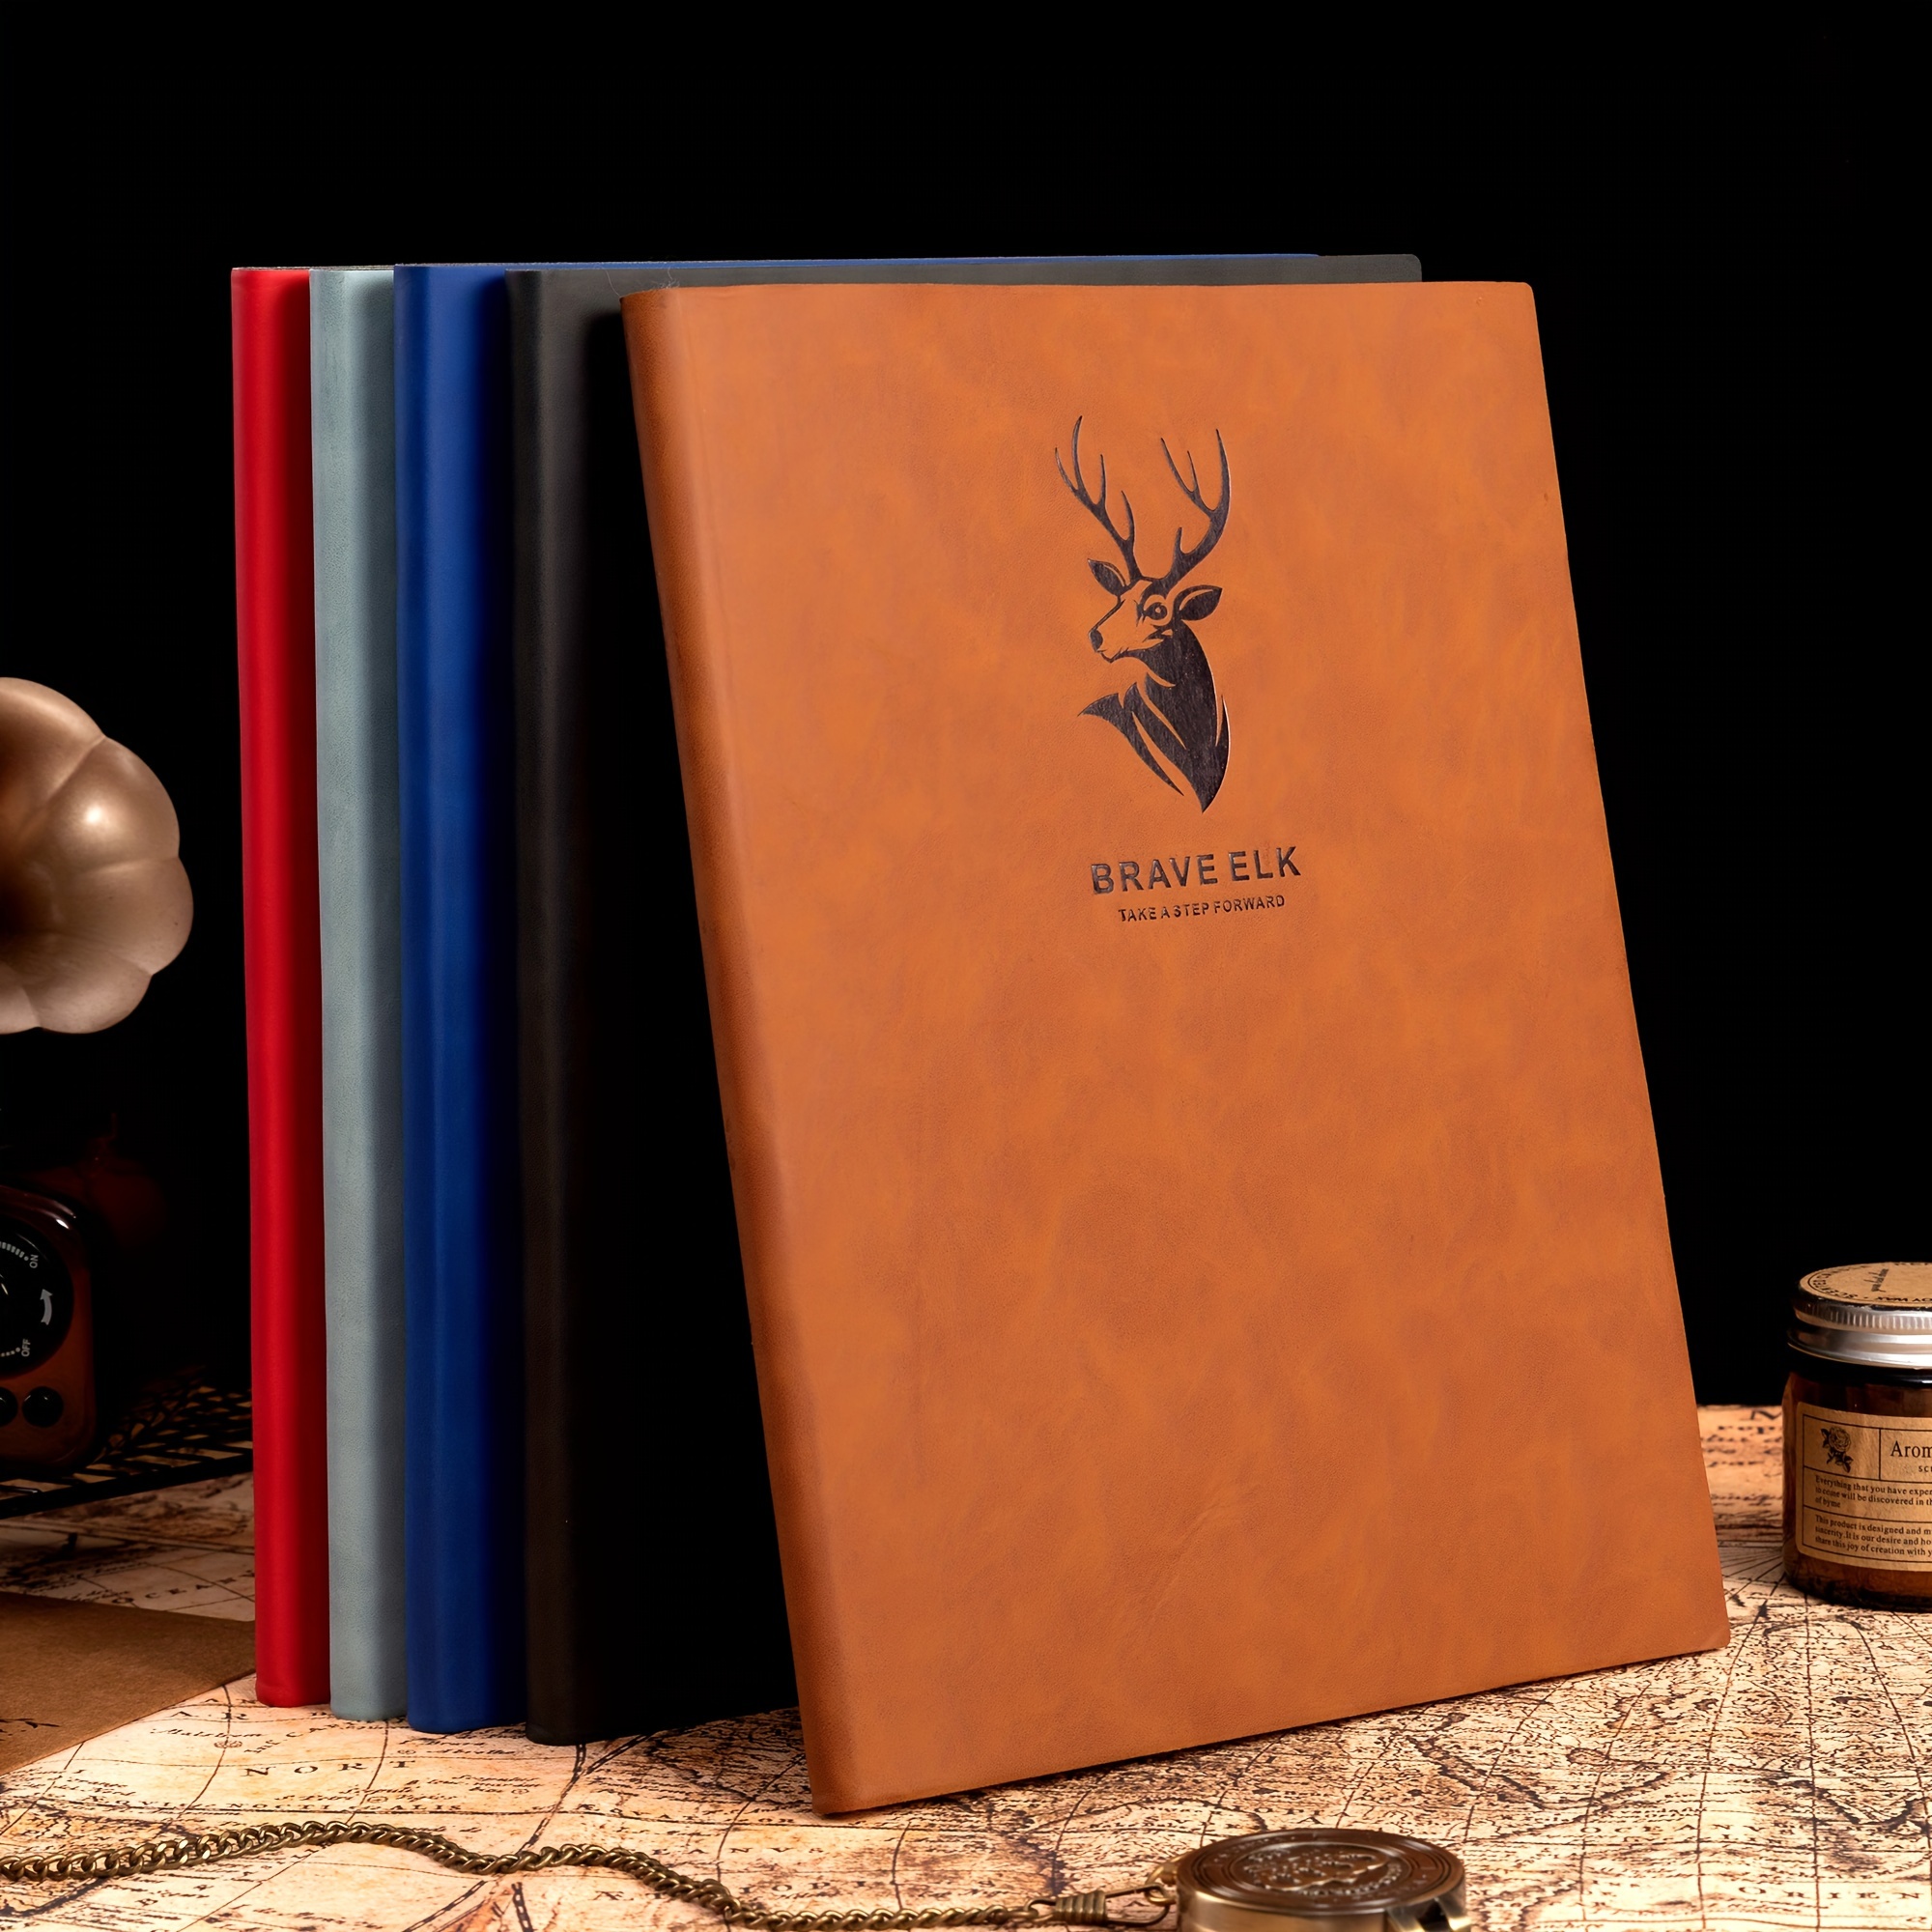 

Brave Elk A4 Leather Journal Notebook - Glossy Finish, Plain Ruling, Hardcover Leather Cover, Antler Design, Perfect For Work And Writing Pads